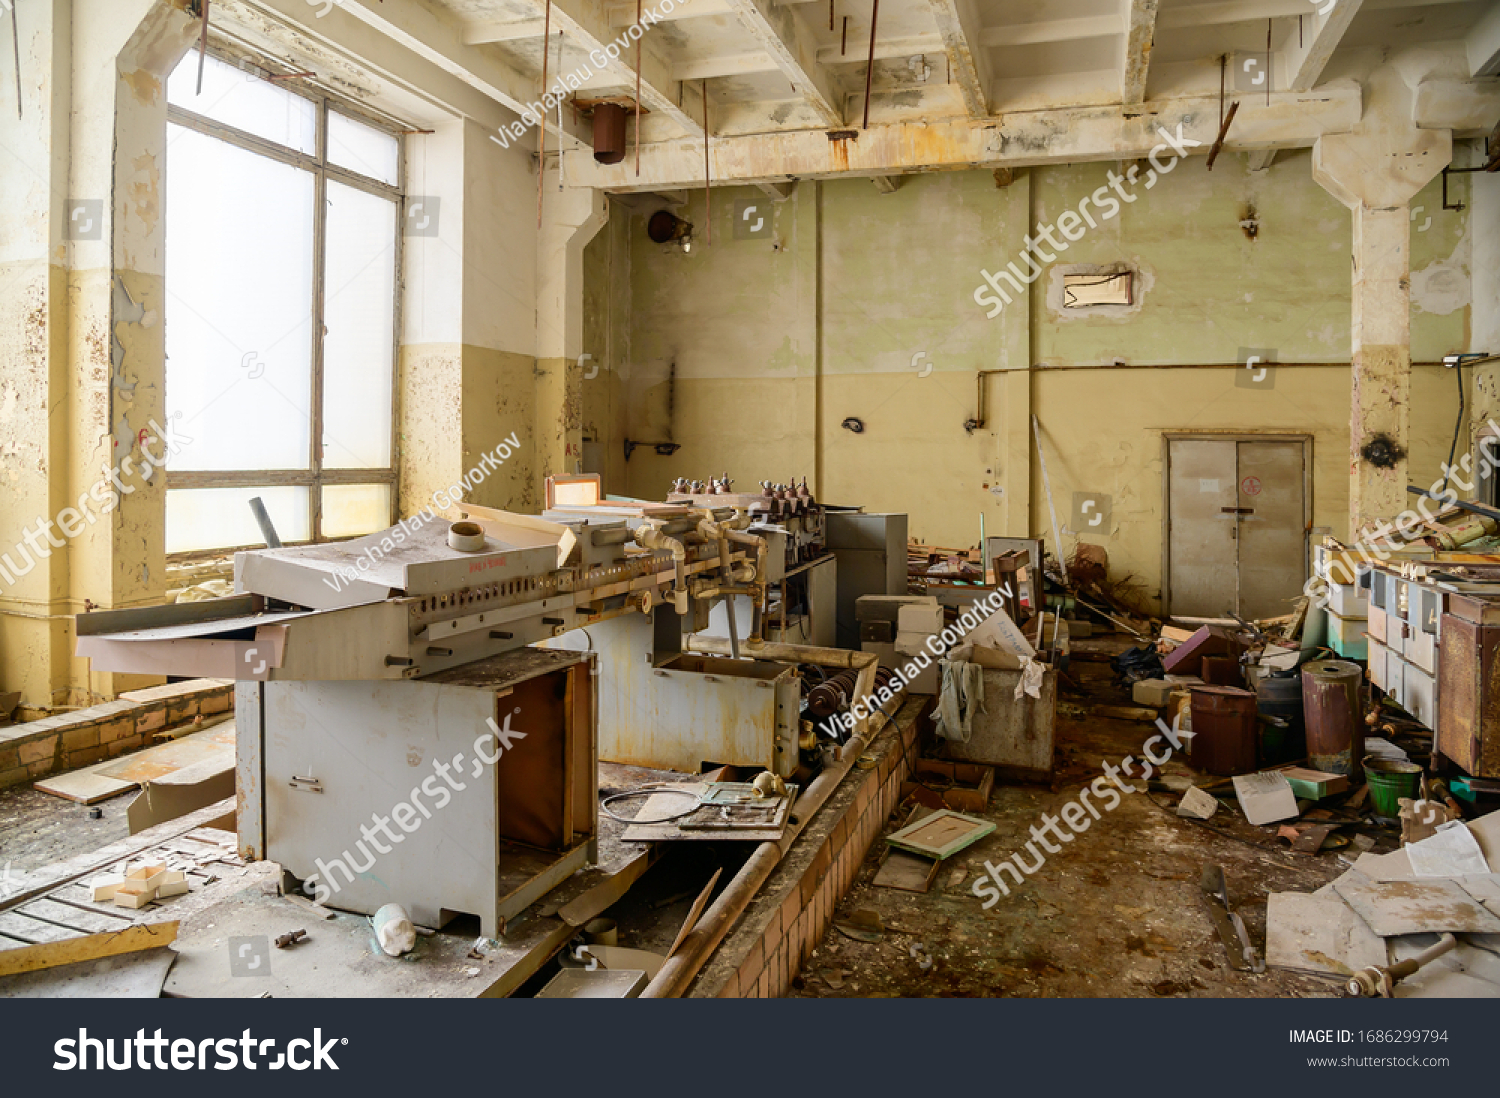 Photo of a garbage dump in an abandoned room of a destroyed factory #1686299794